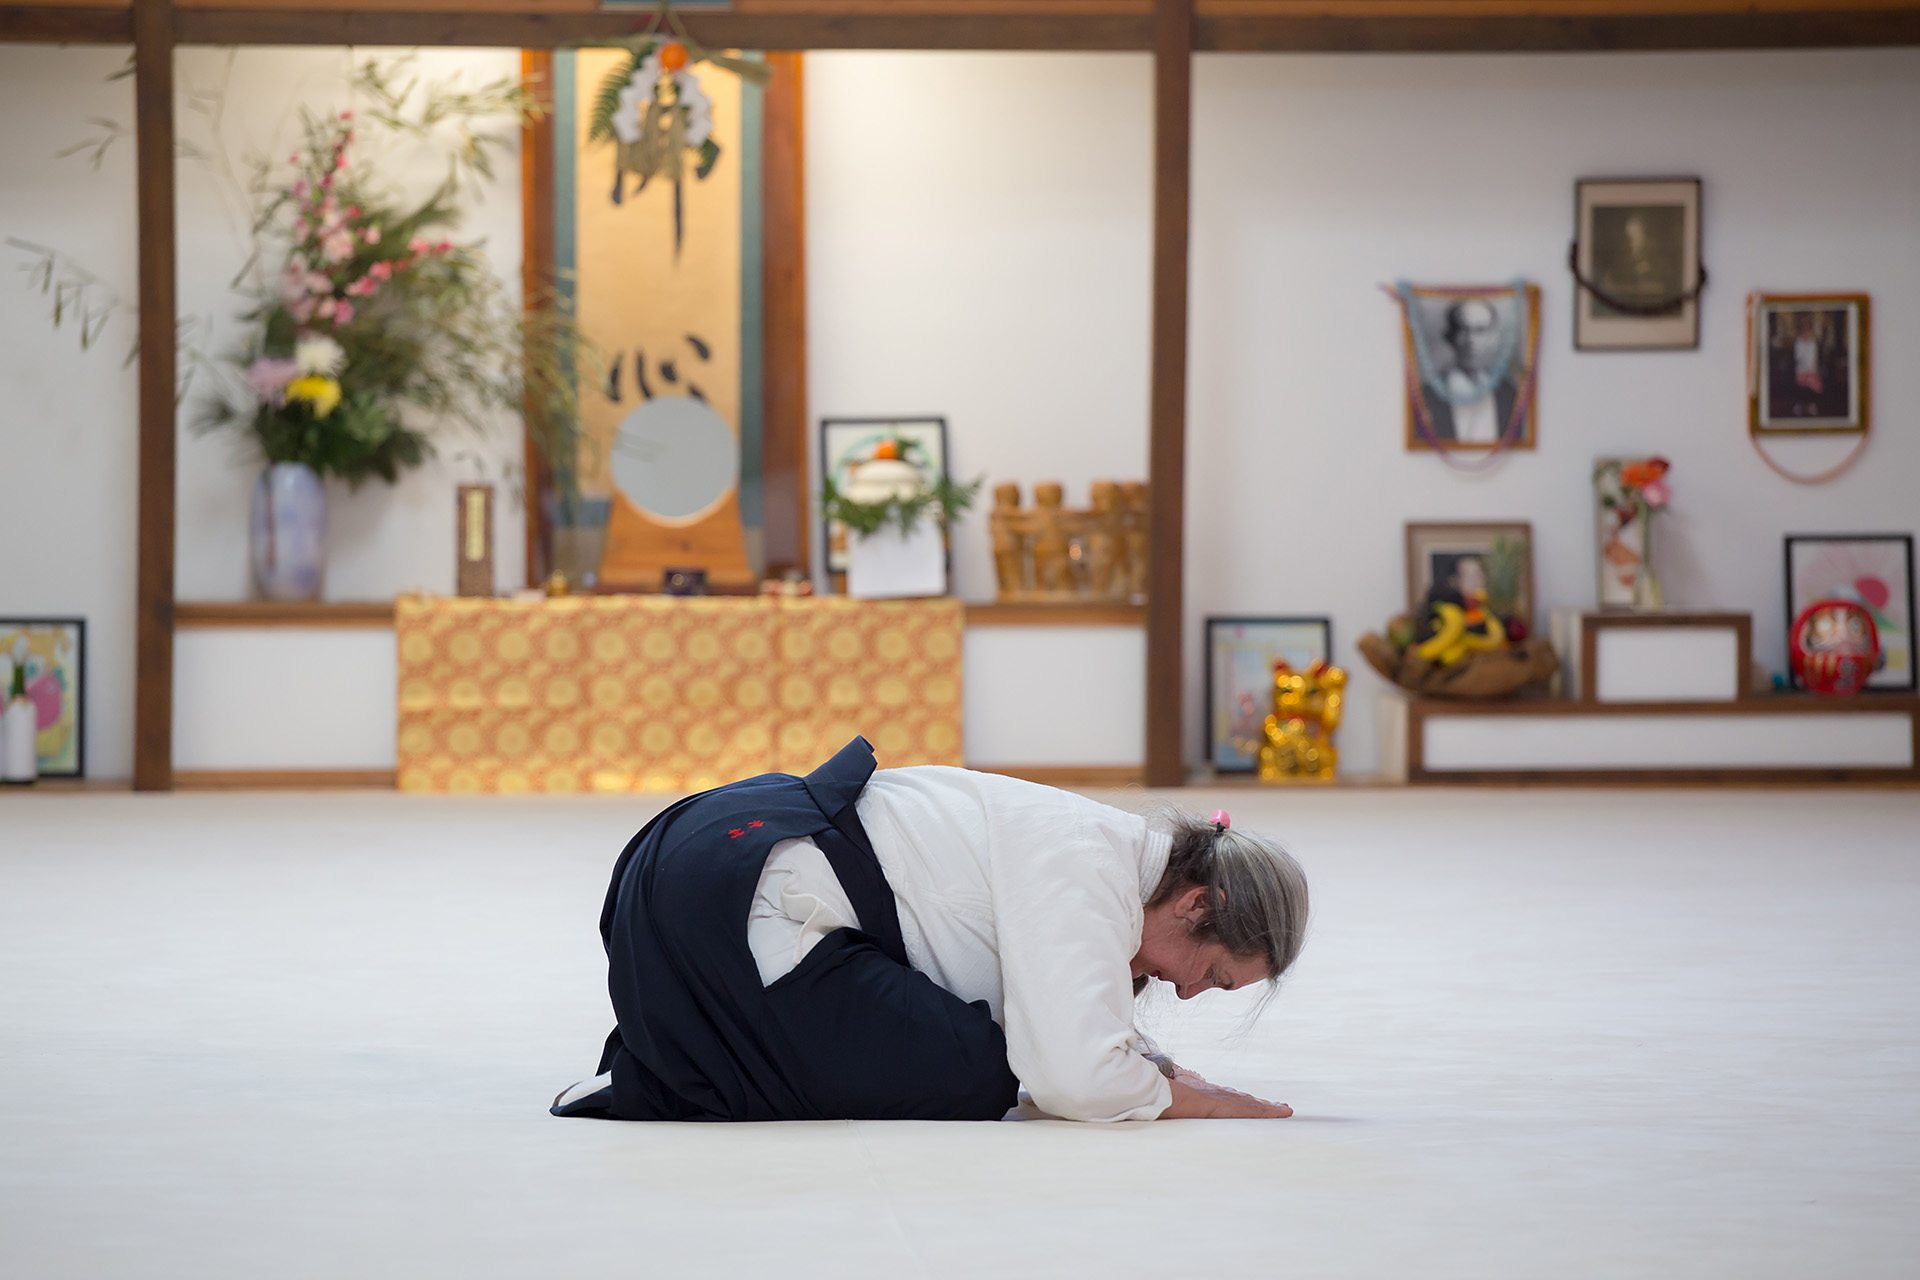 aikido is pic 2